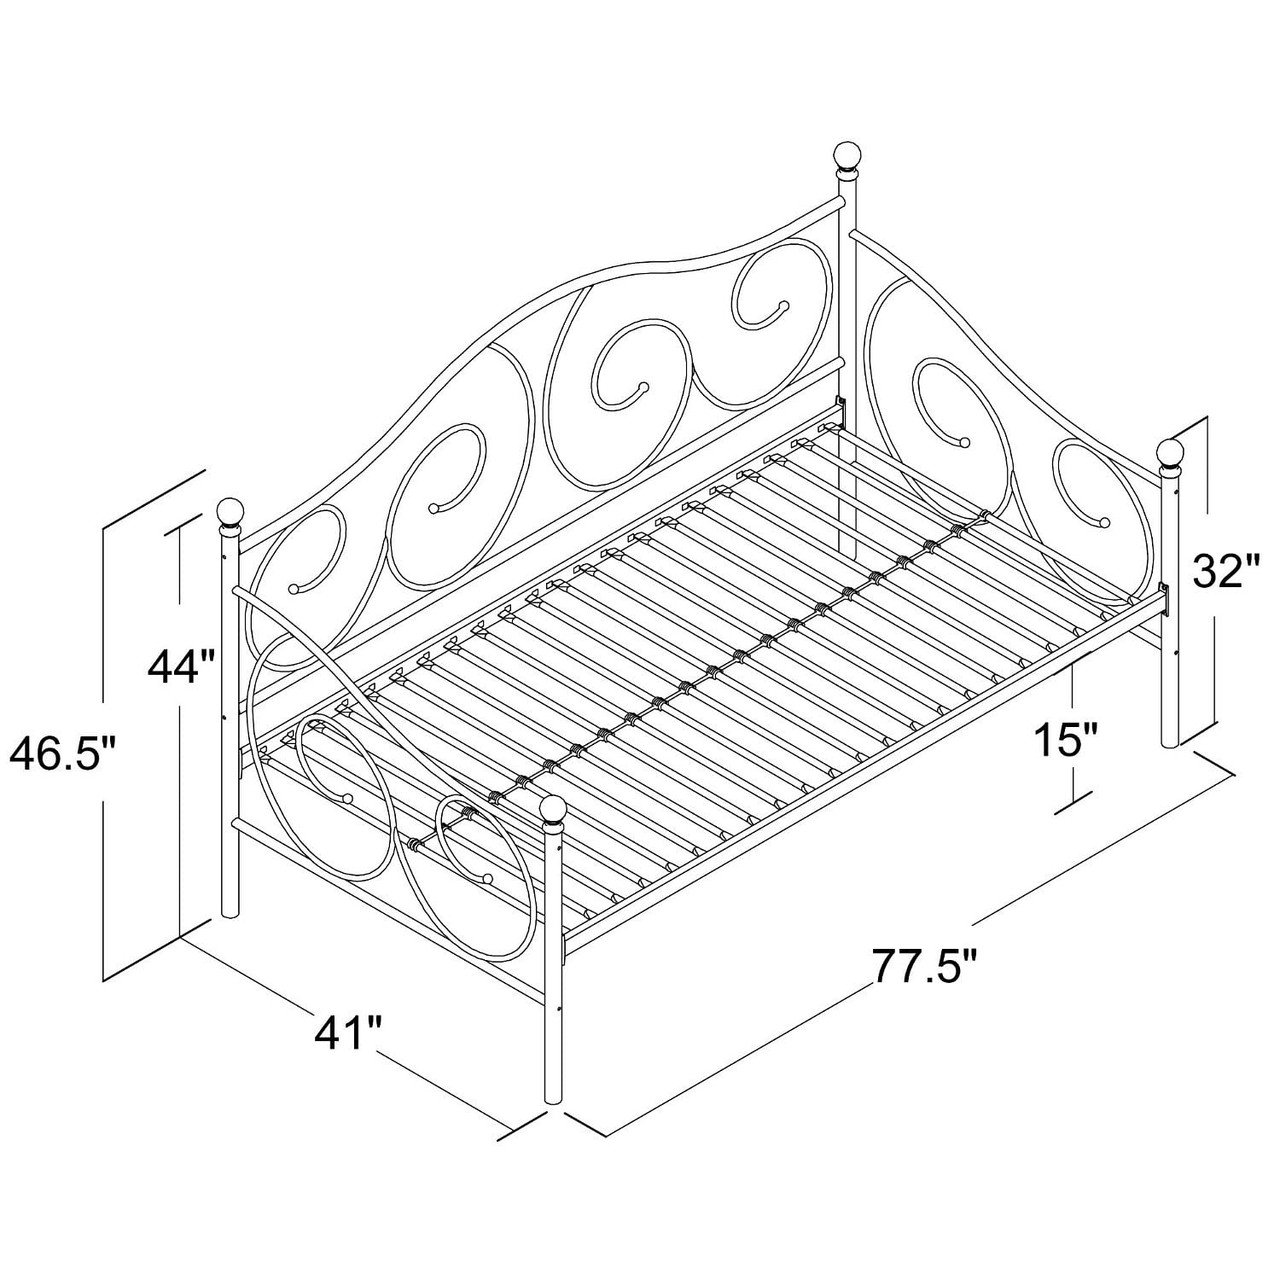 Twin size White Metal Day Bed Frame - 400 lb Weight Limit